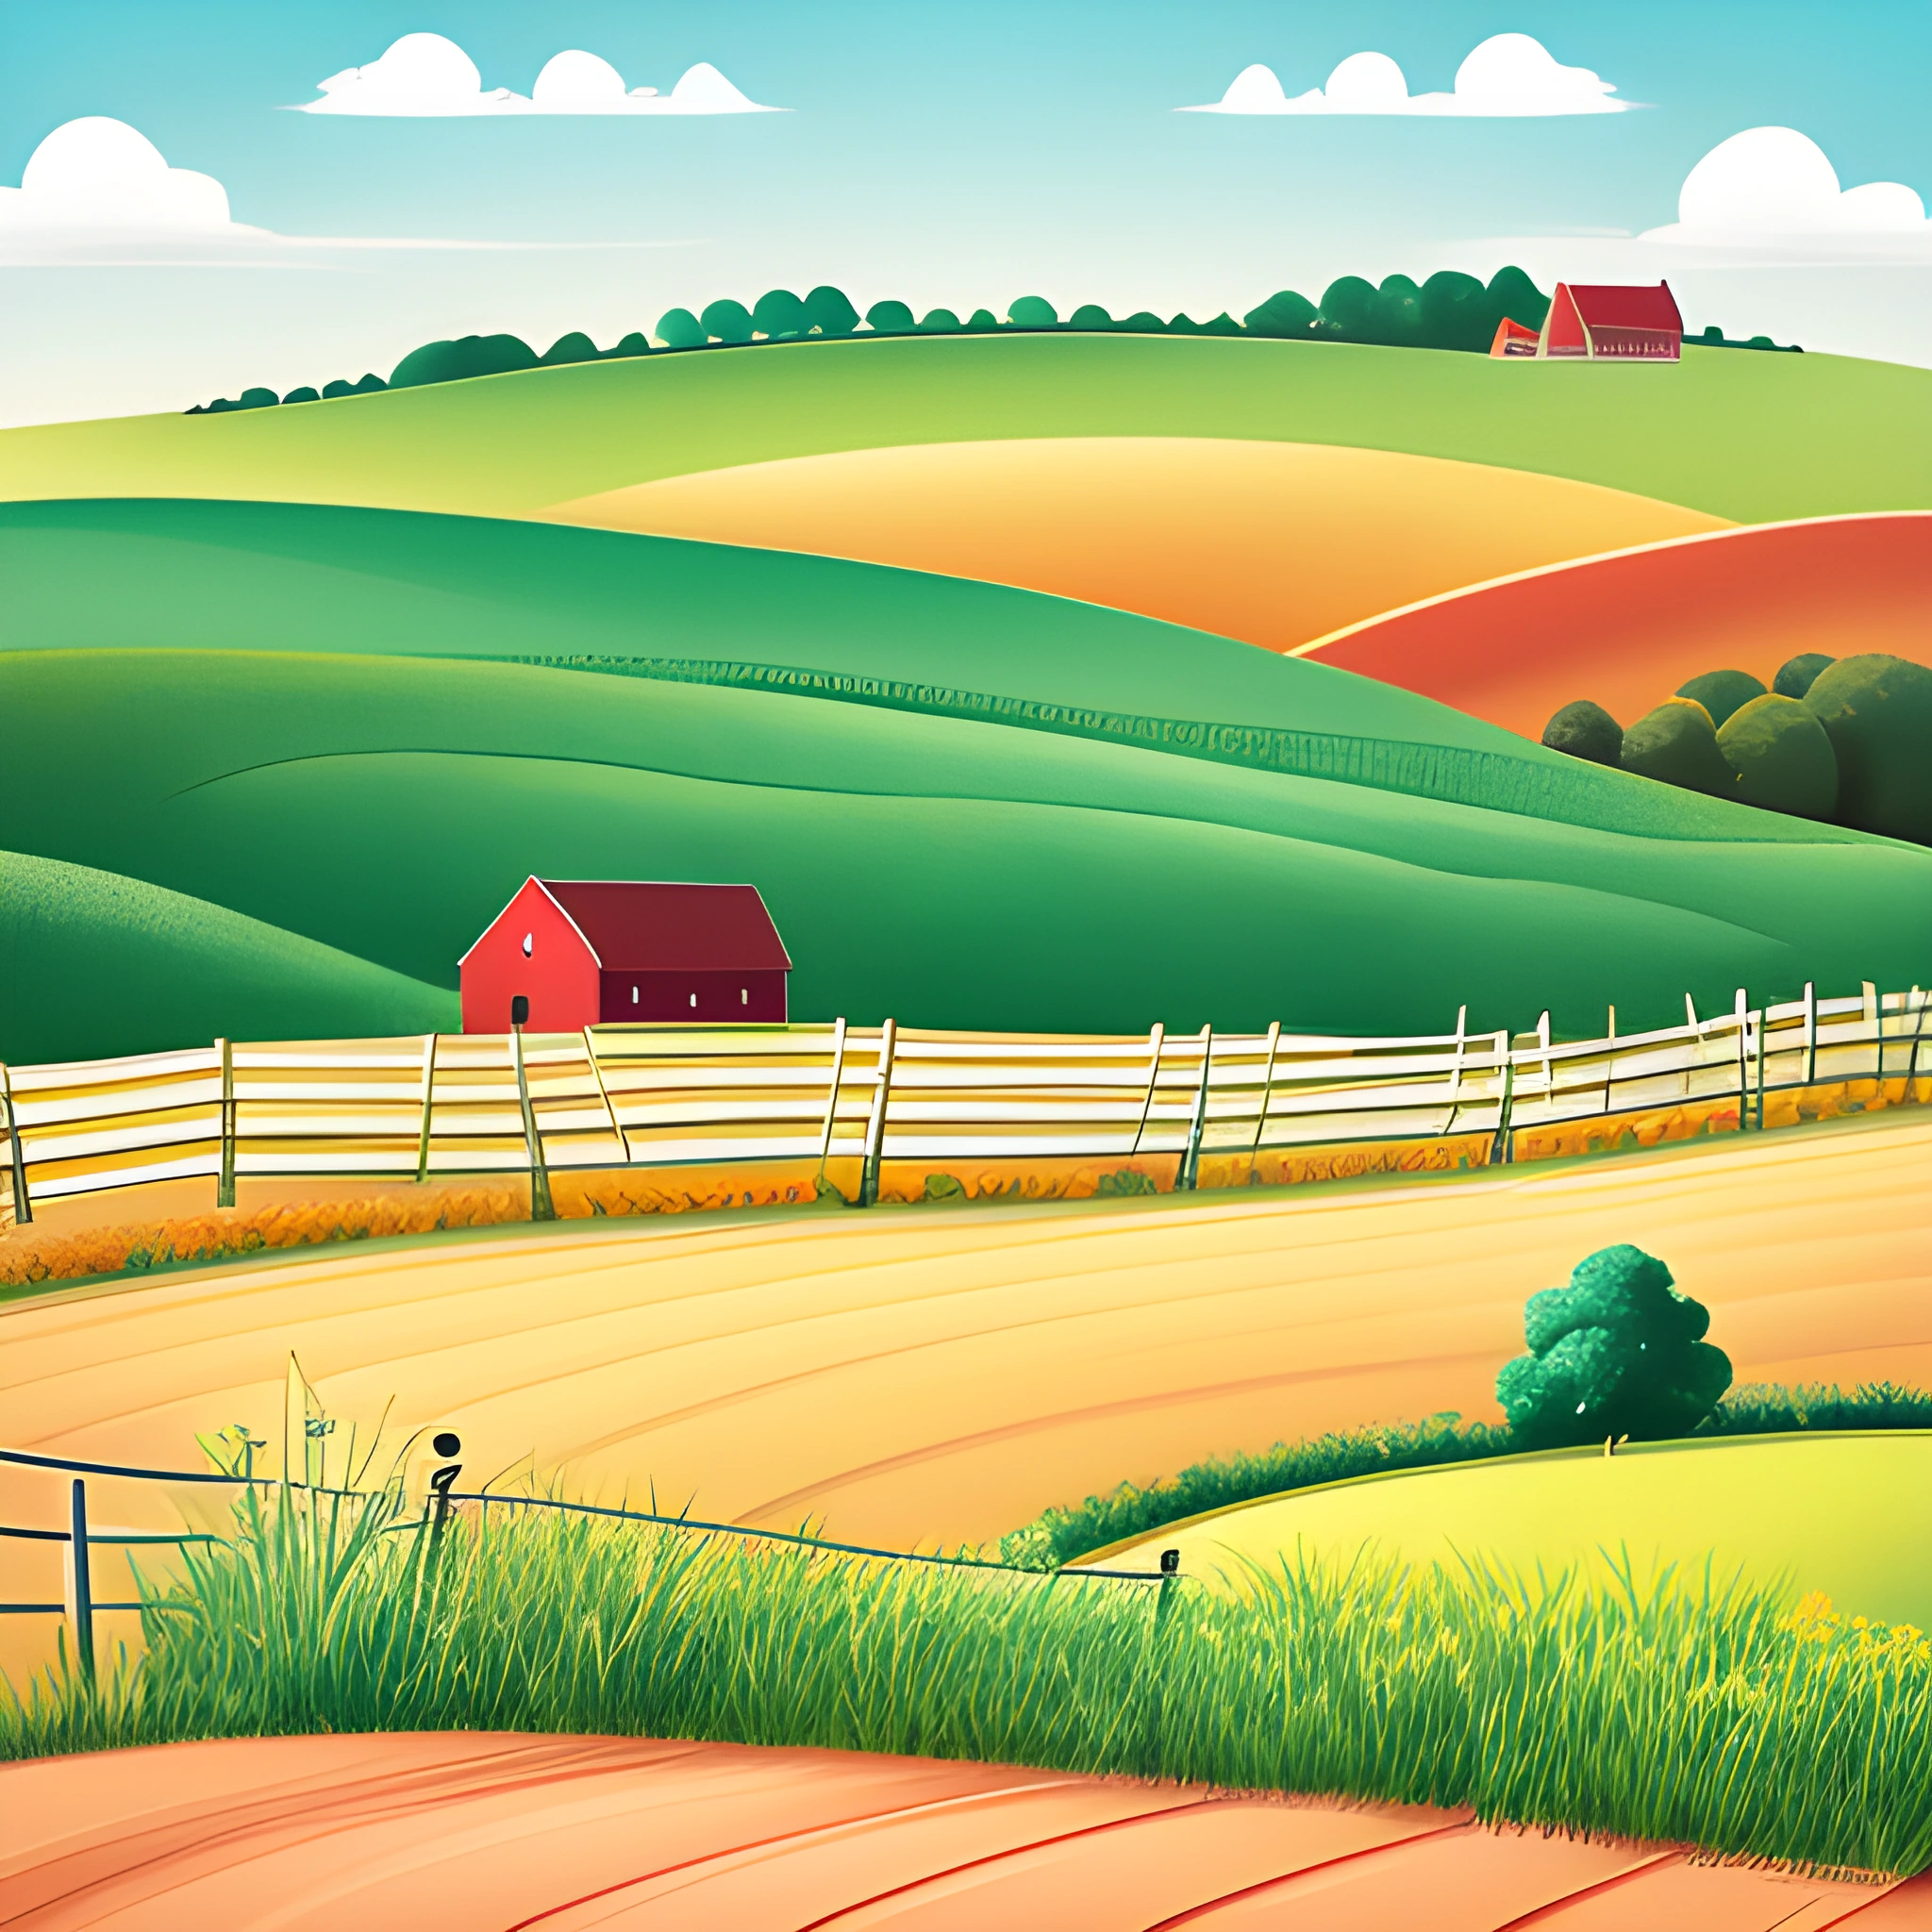 a farm scene with a red barn and a fence